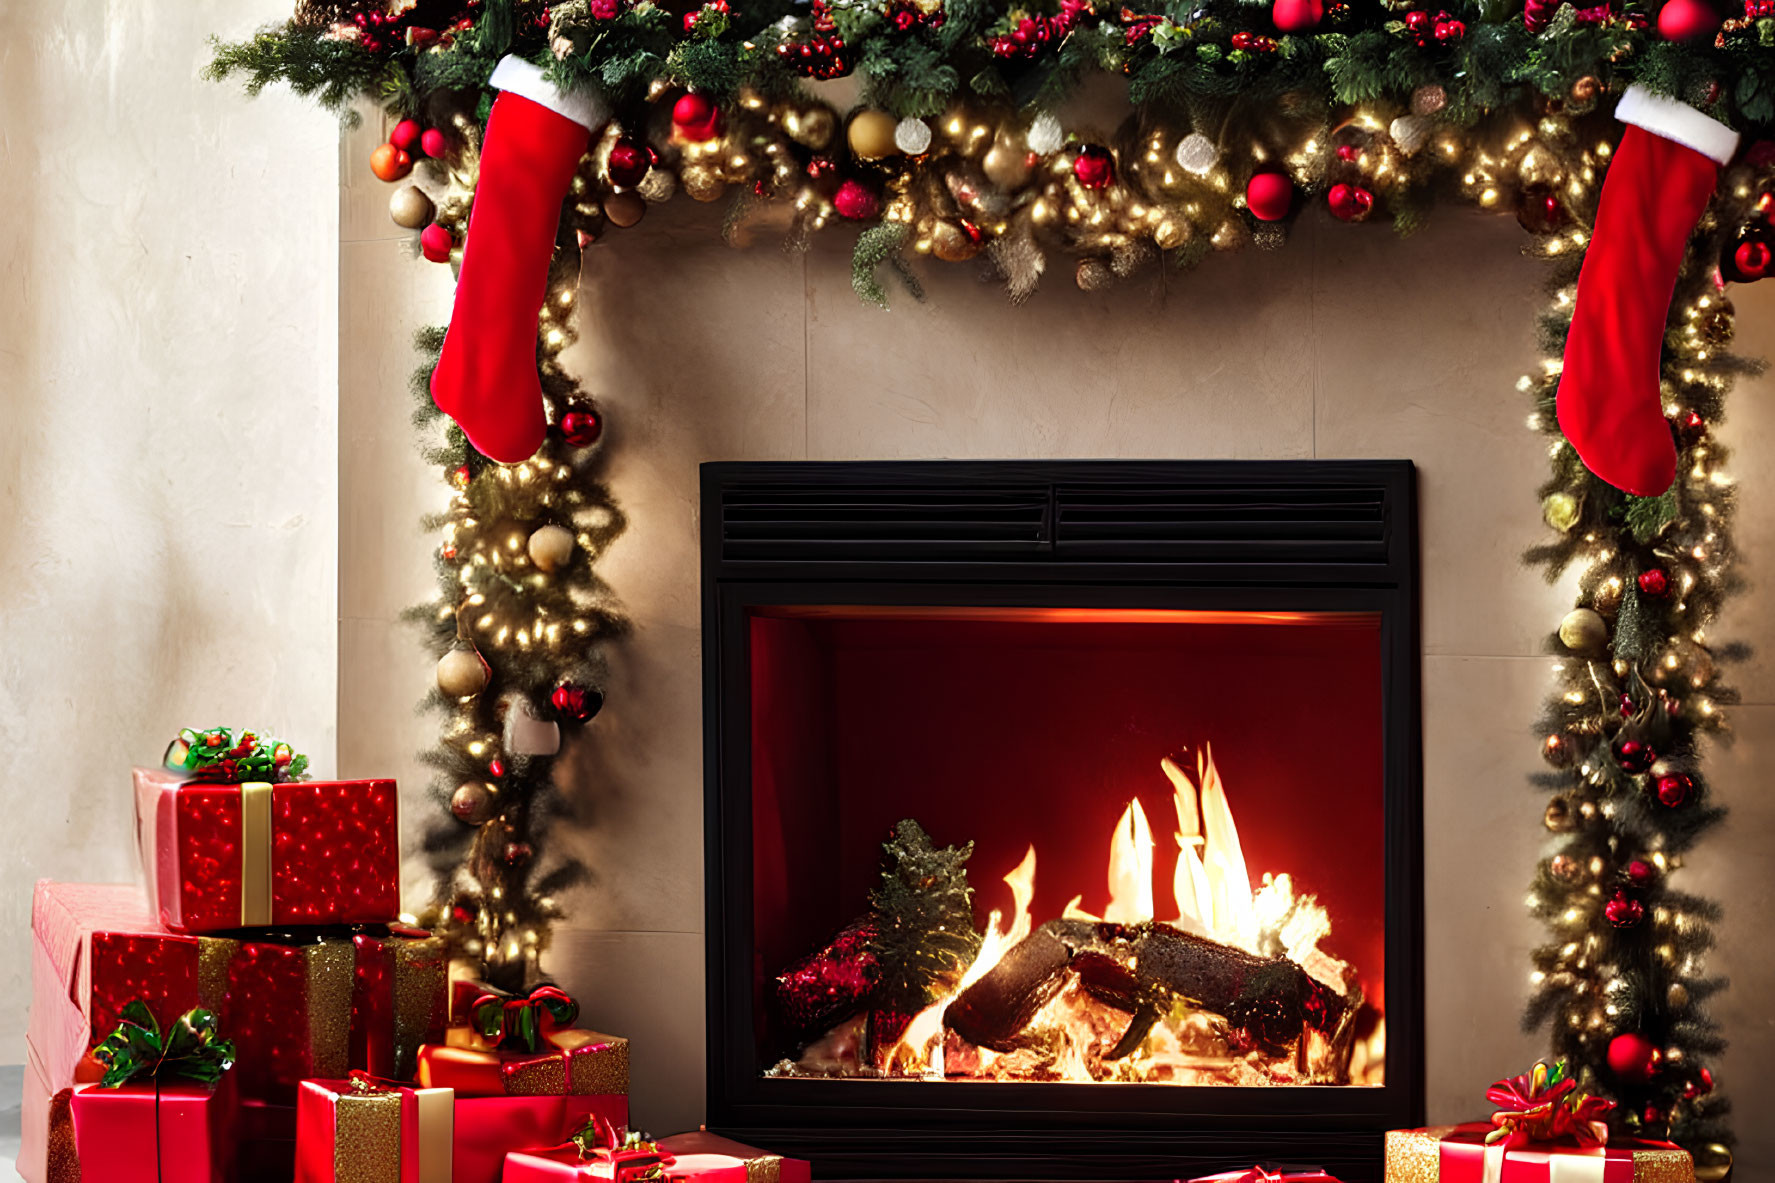 Festively Decorated Fireplace with Stockings and Christmas Gifts